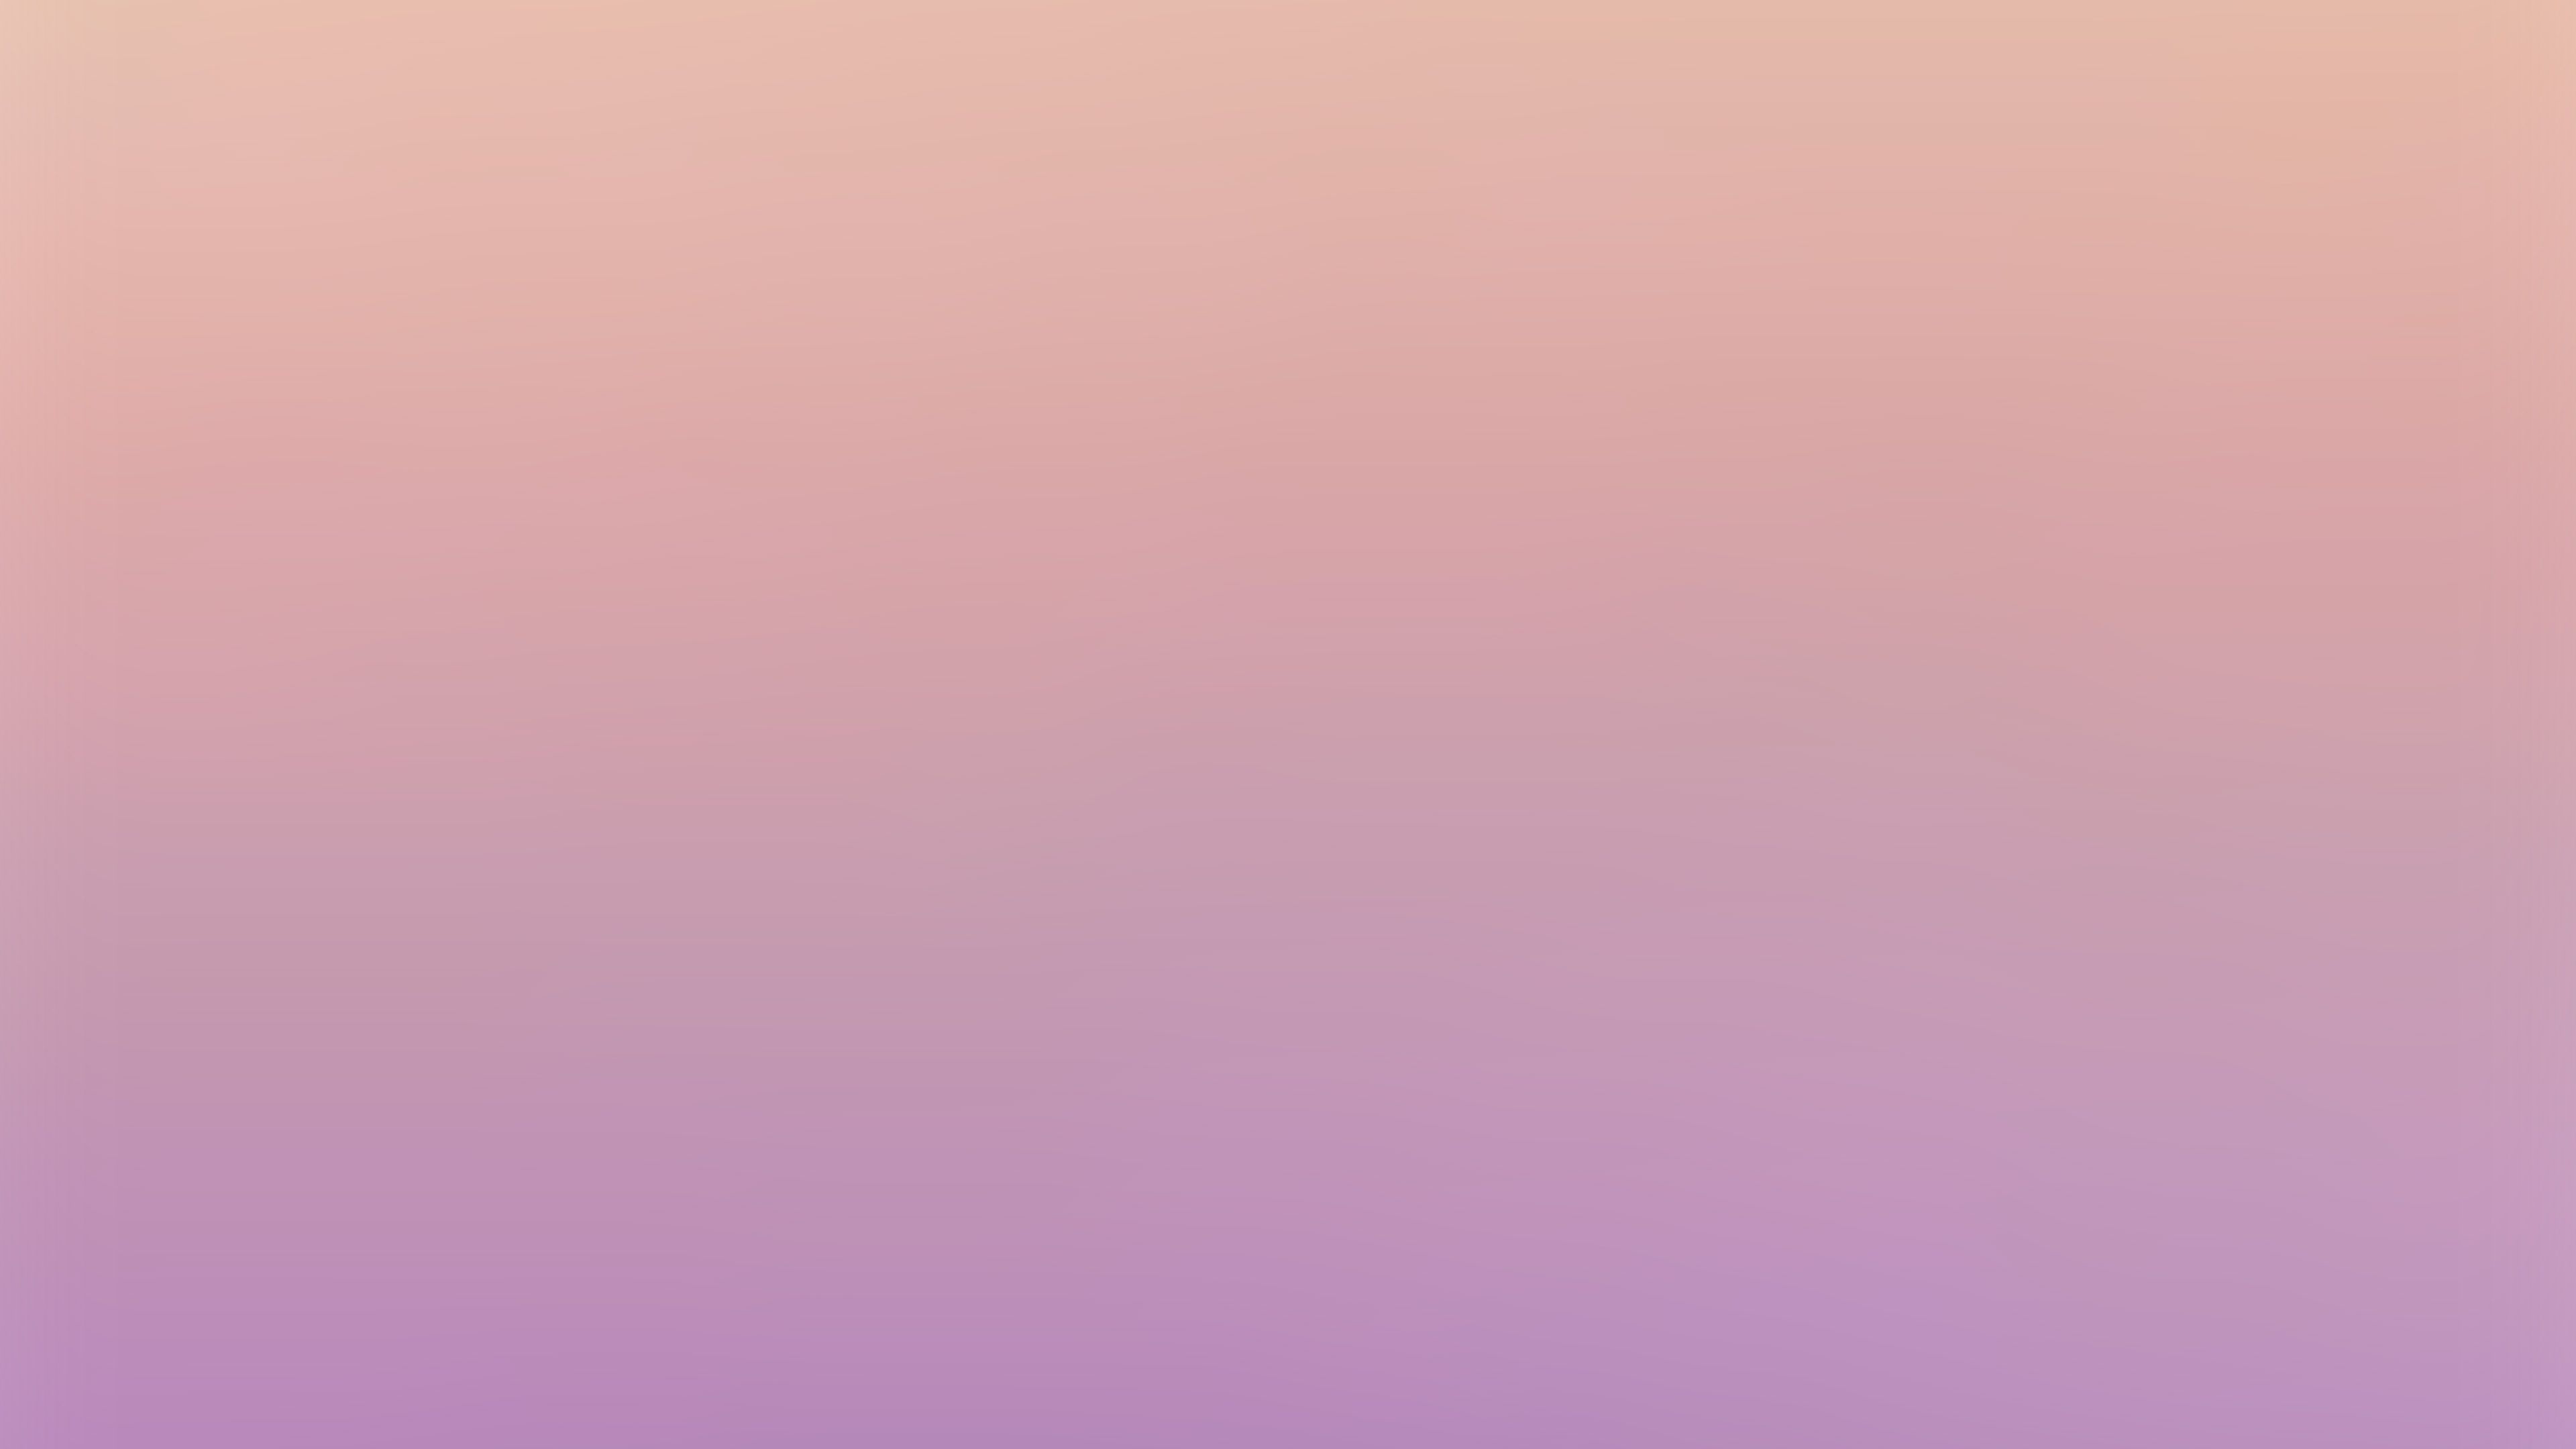 Pastel 4K wallpapers, High definition, Vibrant and colorful, Modern and stylish, 3840x2160 4K Desktop